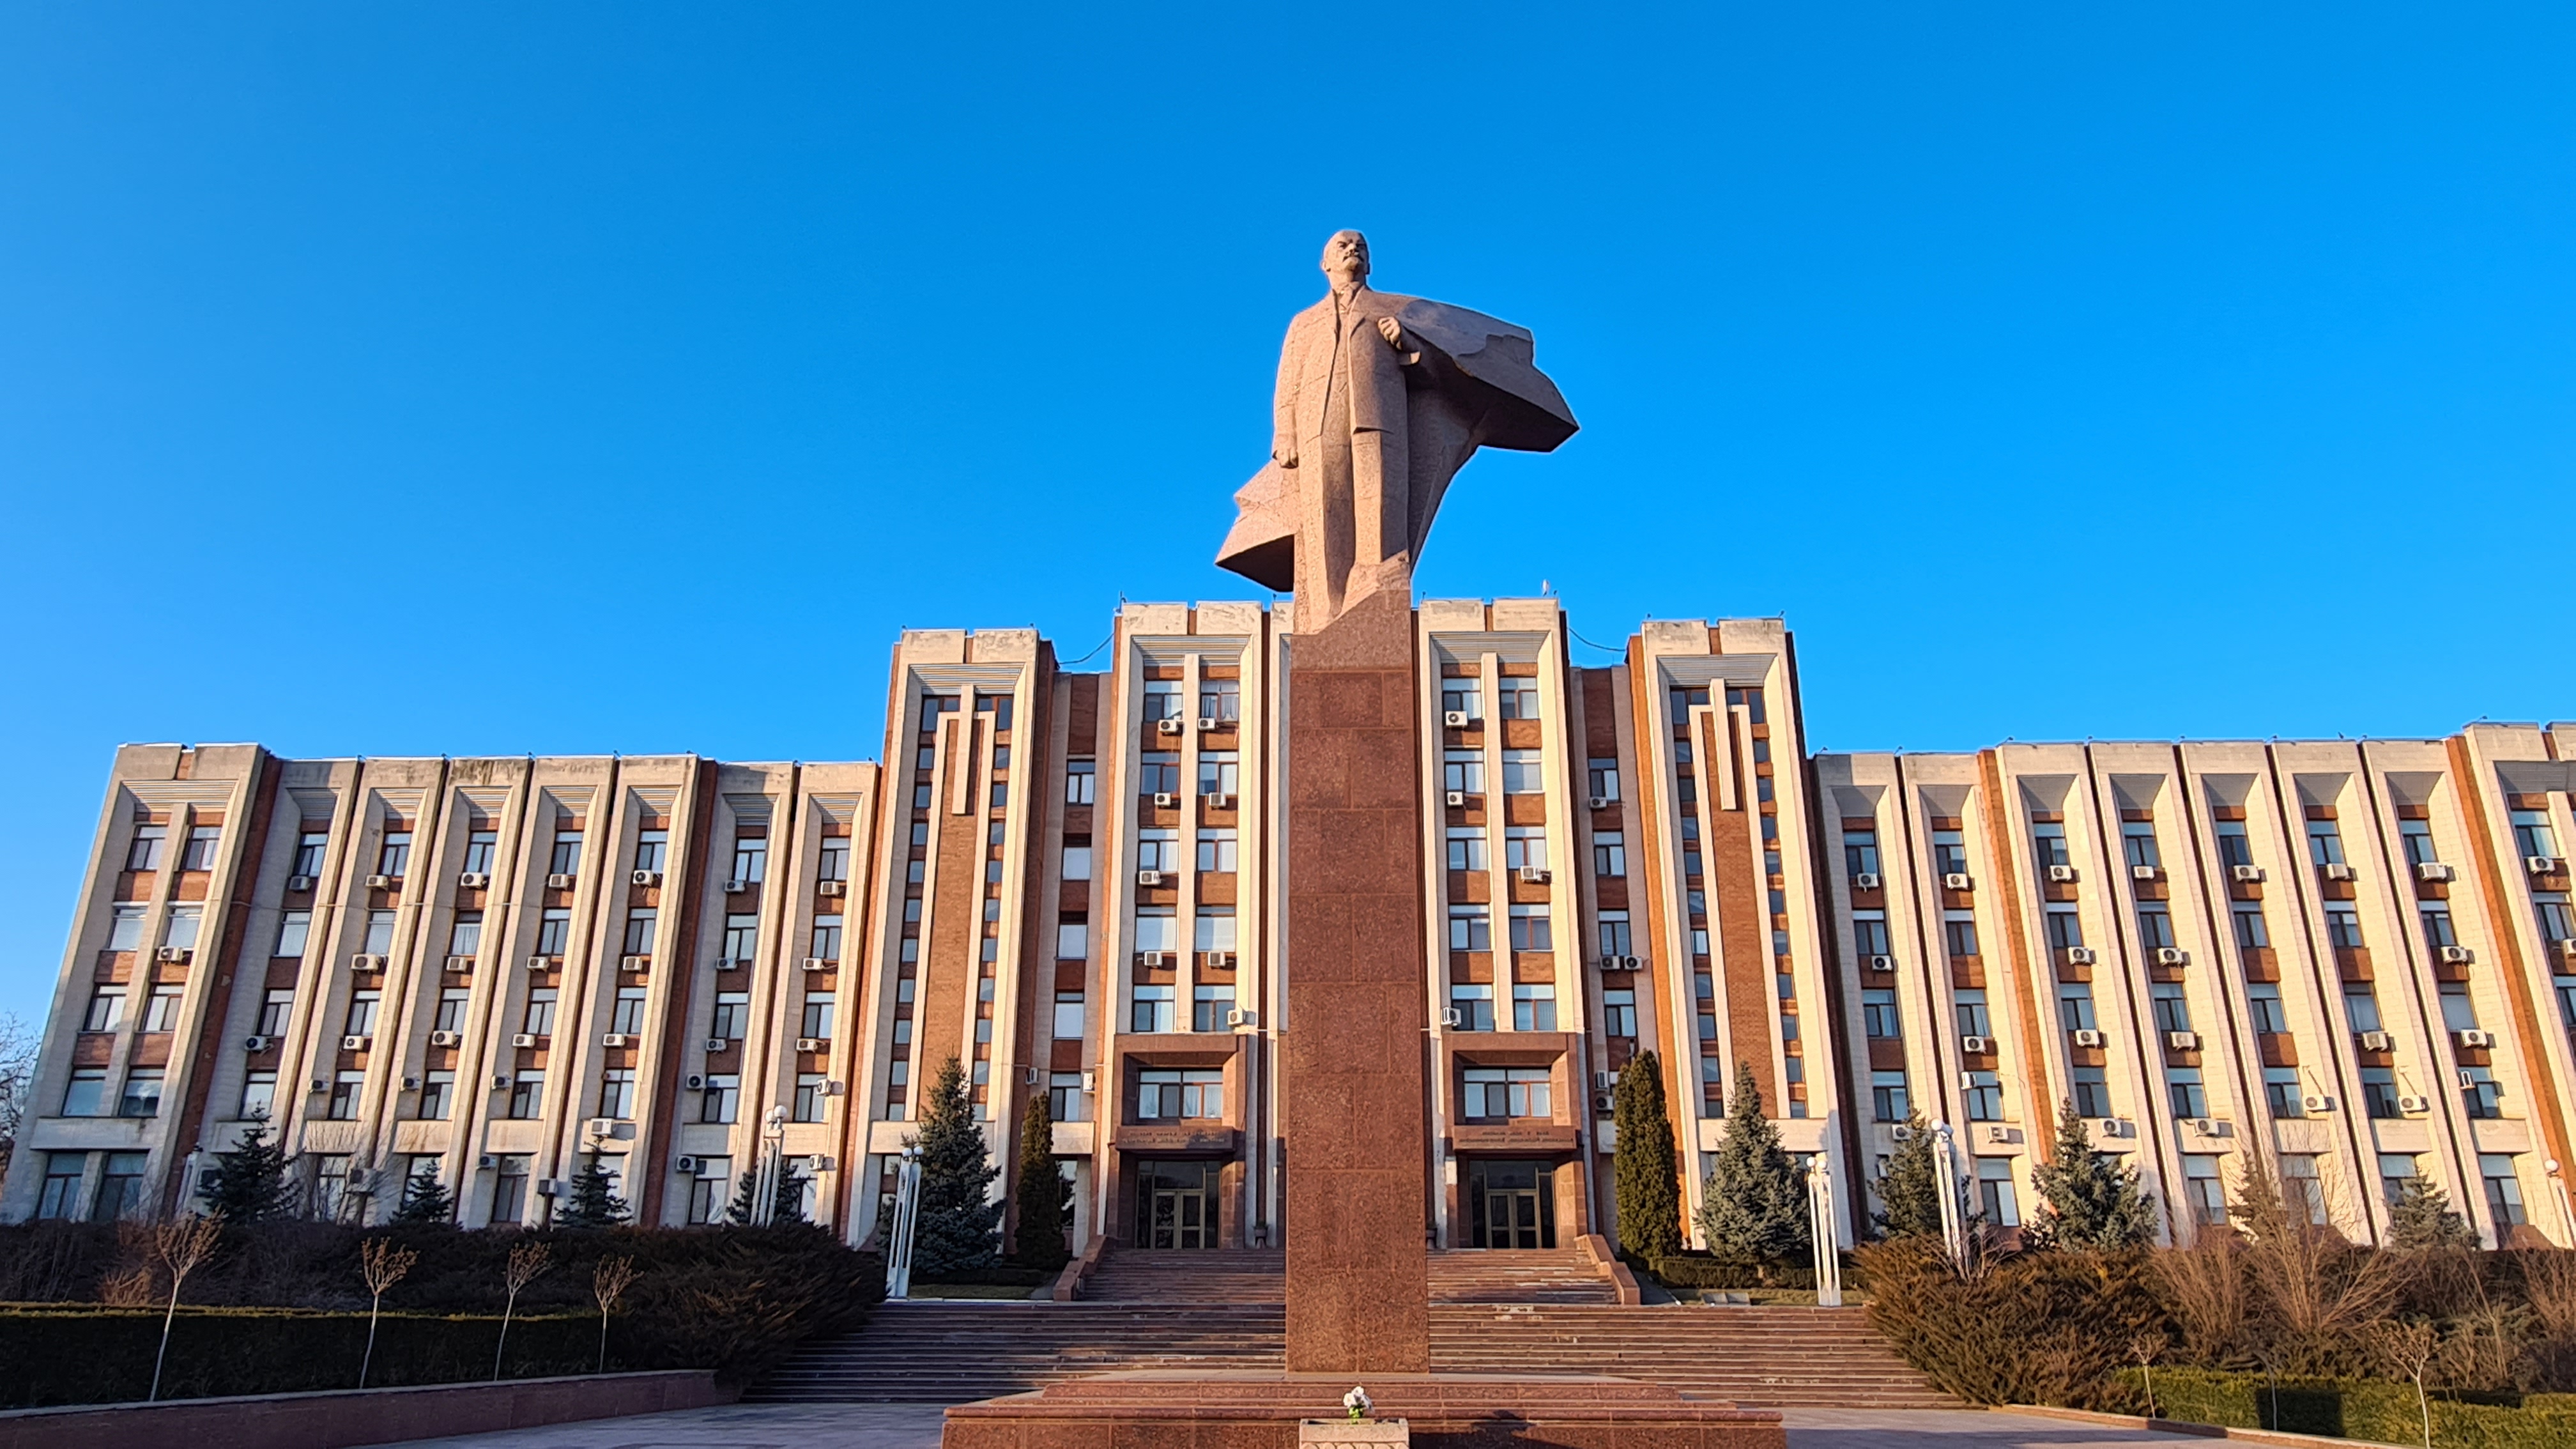 Tiraspol, Moldova – February 13, 2022: Lenin statue in front of the Transnistria Parliament, made out of granite and modeled in 1970 by Nikolai Tomsky.